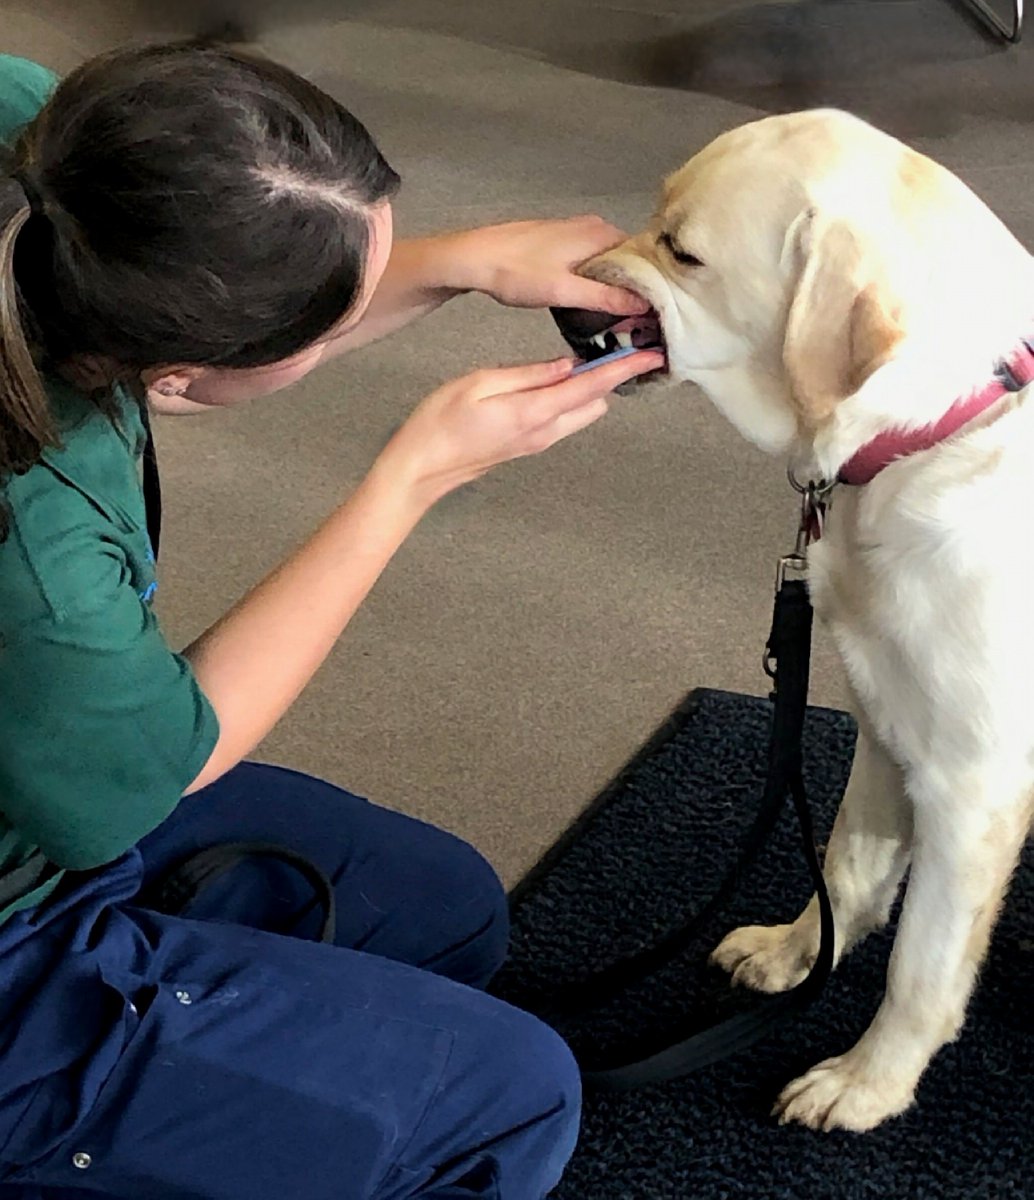 Oral Care Nurse Certificate 2024 🦷 Registration & course now open! This programme aims to provide nurses with the knowledge to deliver effective oral care clinics, drive awareness of oral health & identify pets in need of oral care attention. More here; members.bvna.org.uk/events/65bb8a3…